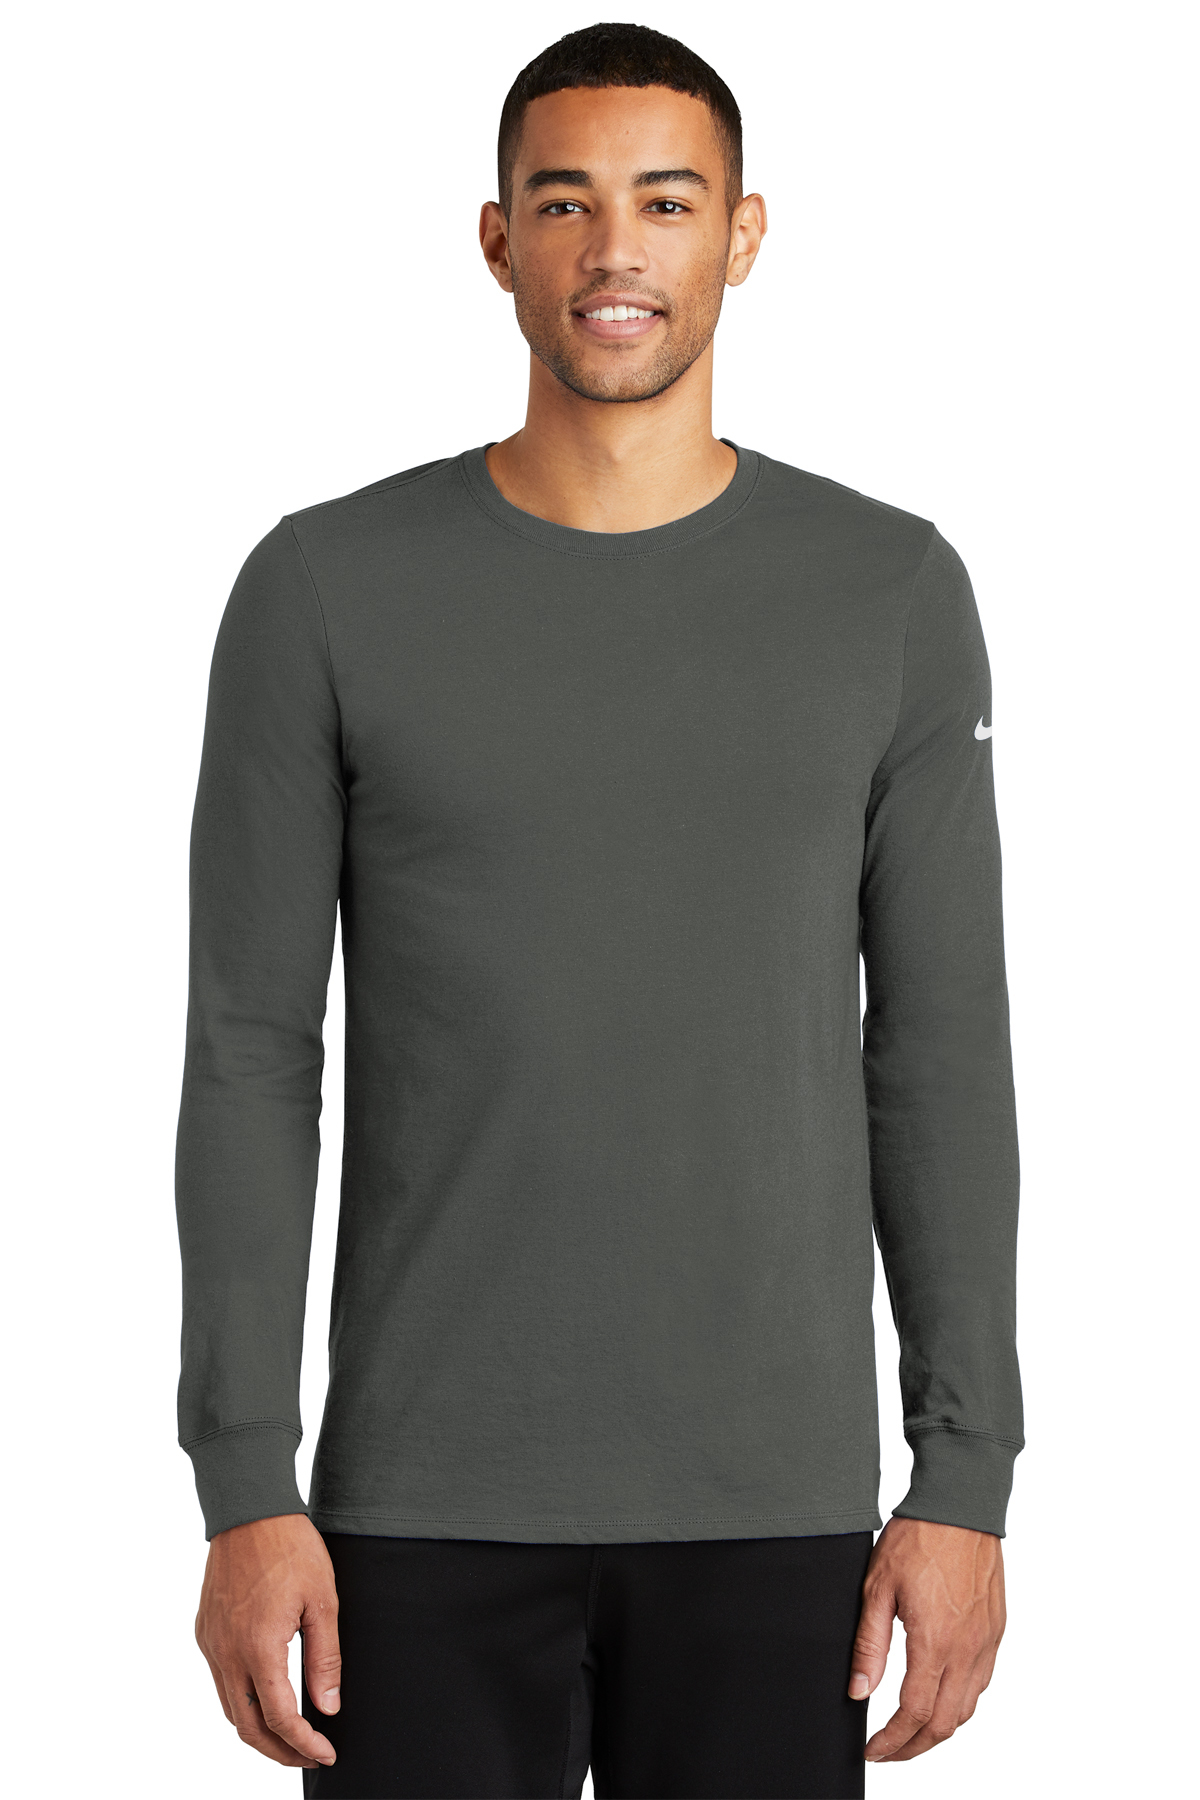 Nike Men's Pro Cool Dri-FIT Fitted Long-Sleeve Shirt - Macy's